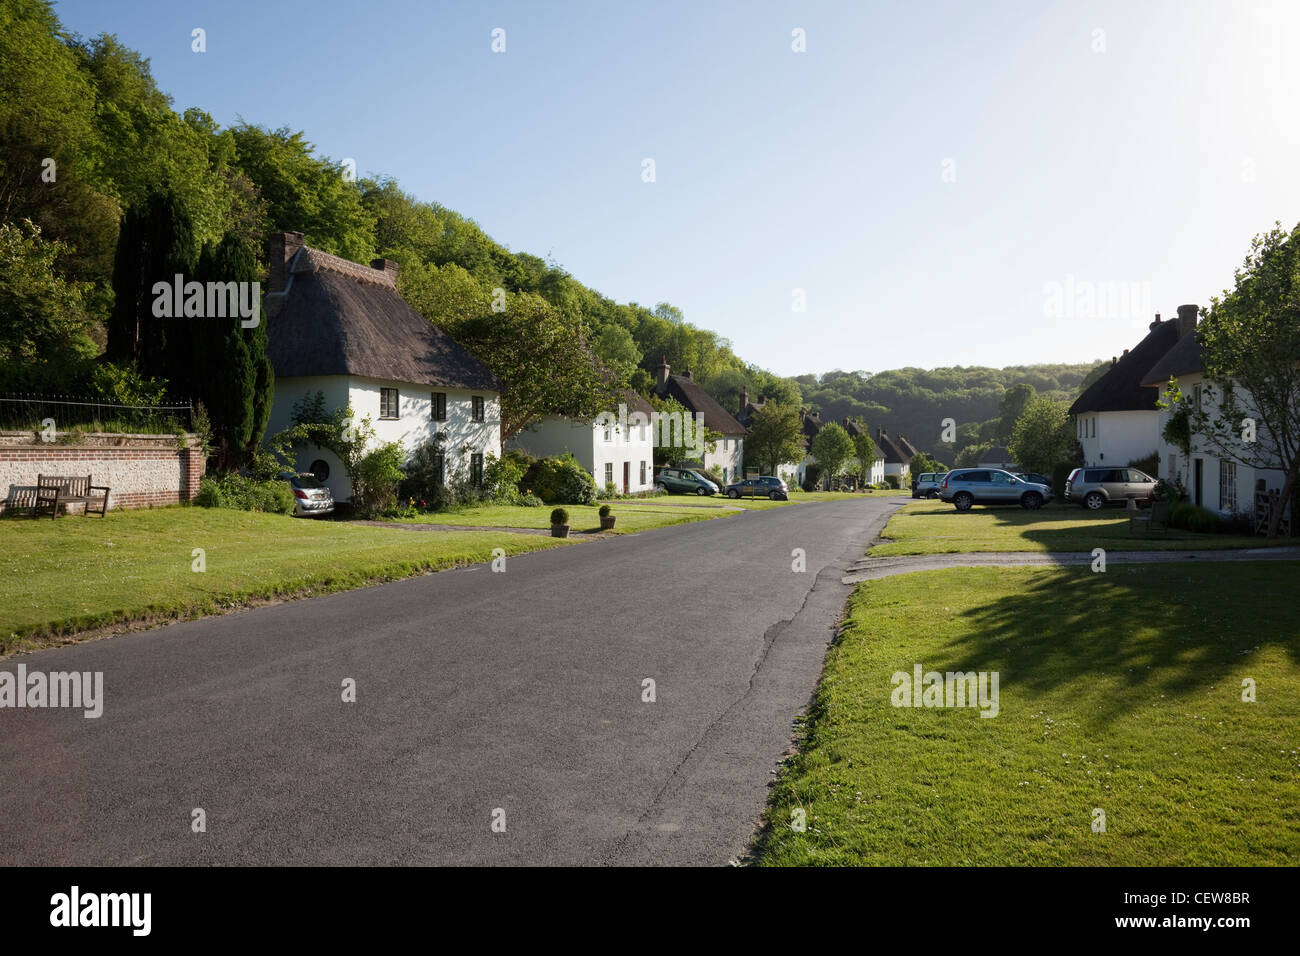 The Street with Thatched Cottages, Milton Abbas, Dorset, England Stock Photo